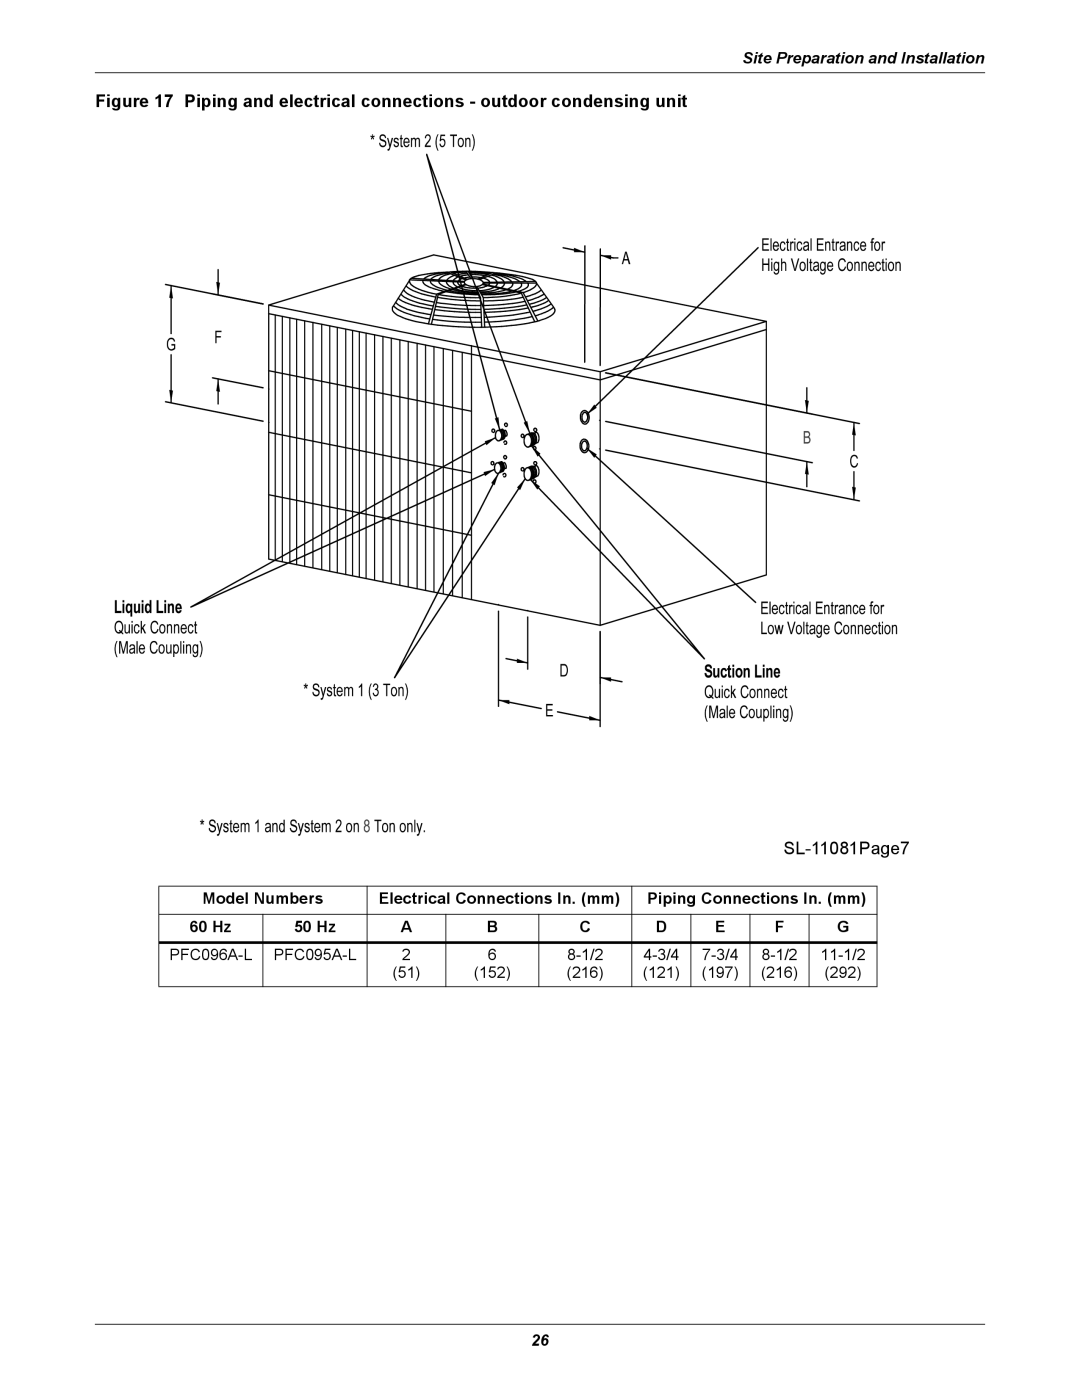 Liebert 8 Tons, 50 & 60Hz user manual SL-11081Page7, Site Preparation and Installation 